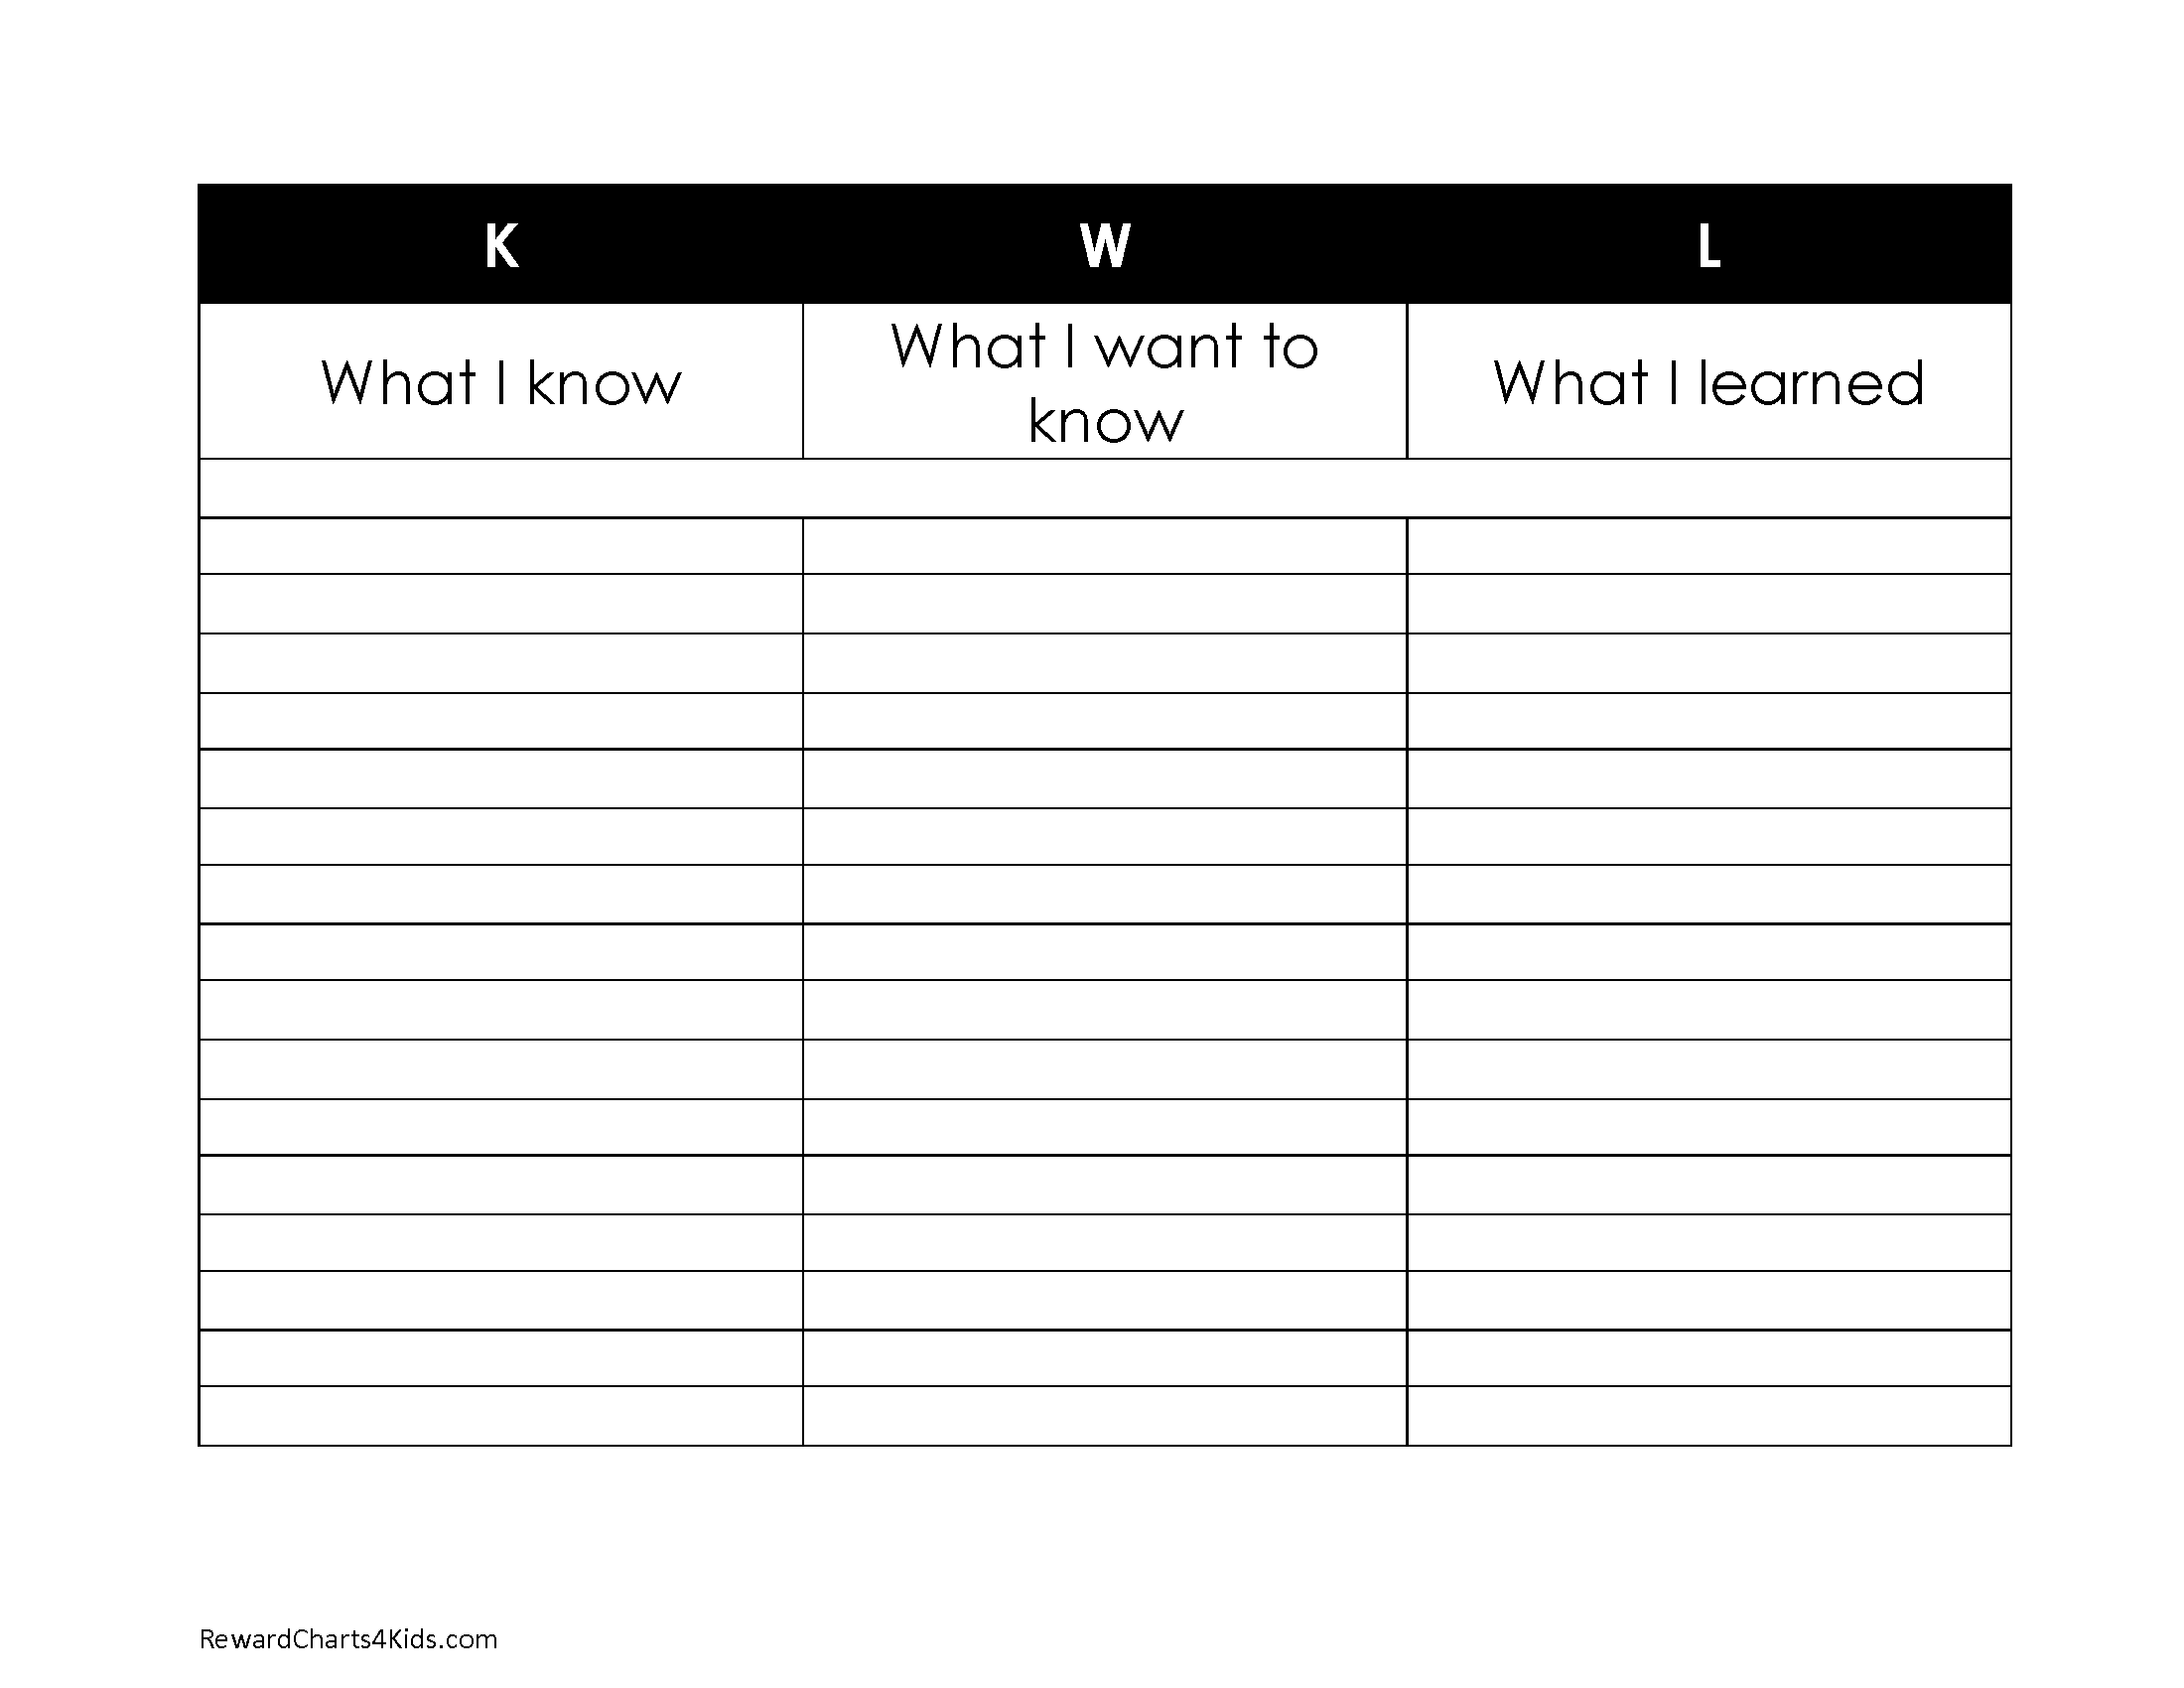 K W L chart template example